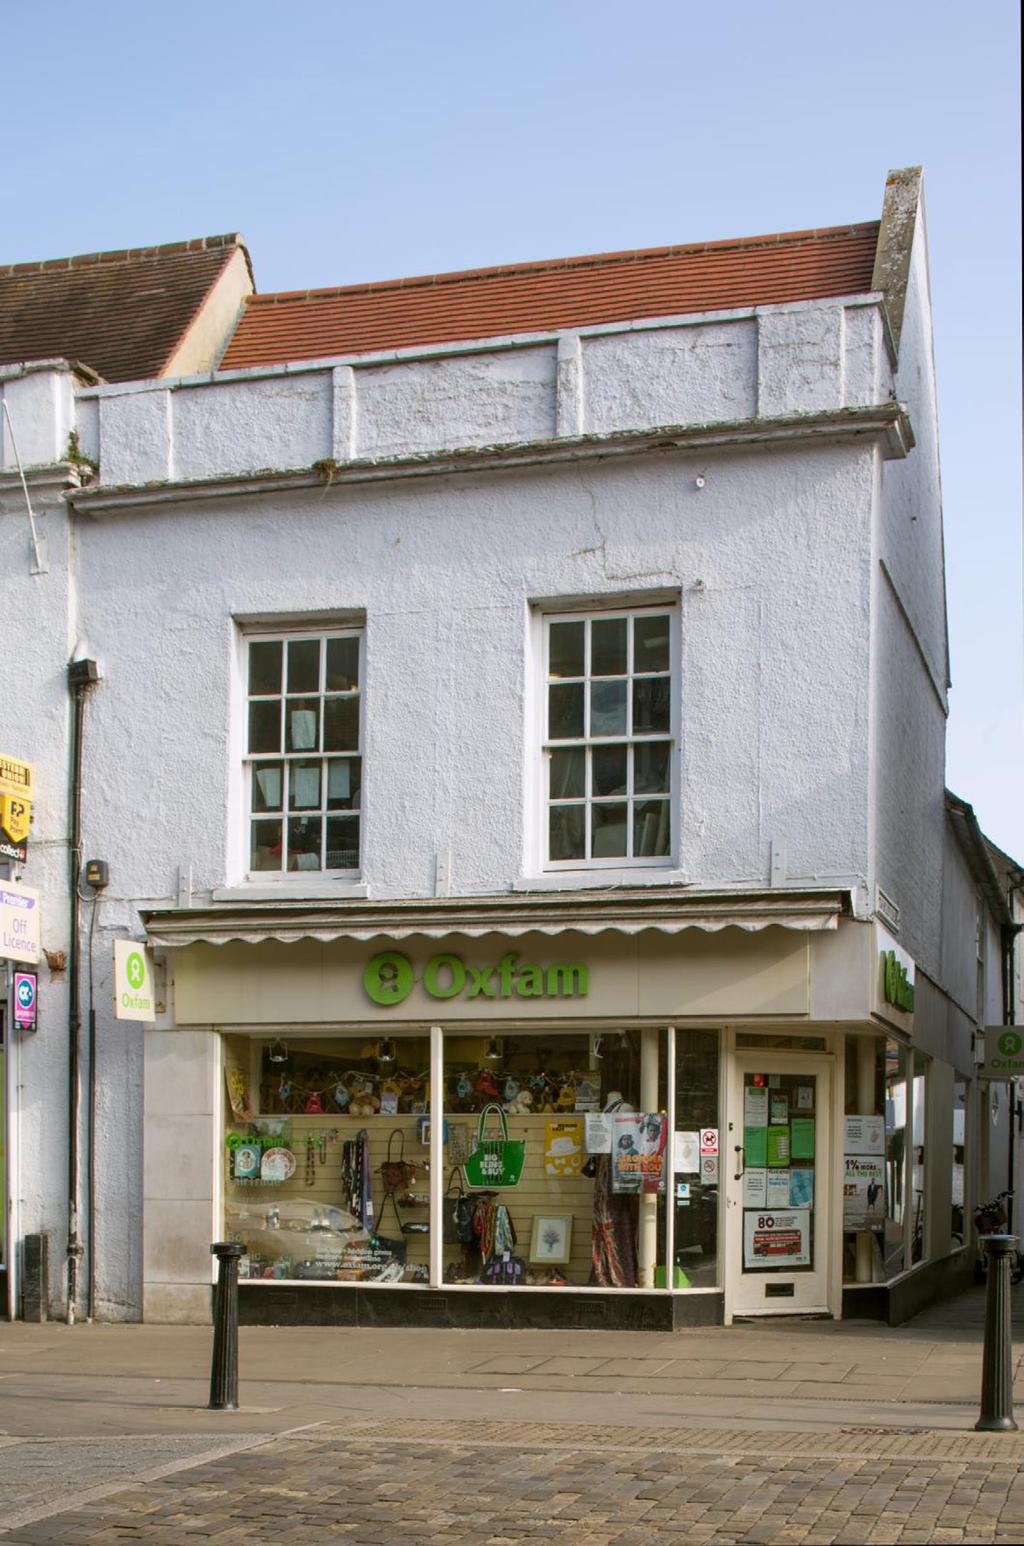 31 HIGH STREET, ELY; OXFAM As part of the Early Fabric in Historic Towns: Ely project 31 High Street, Ely was visited and surveyed on the 18th September 2014 by Rebecca Lane Investigator from the